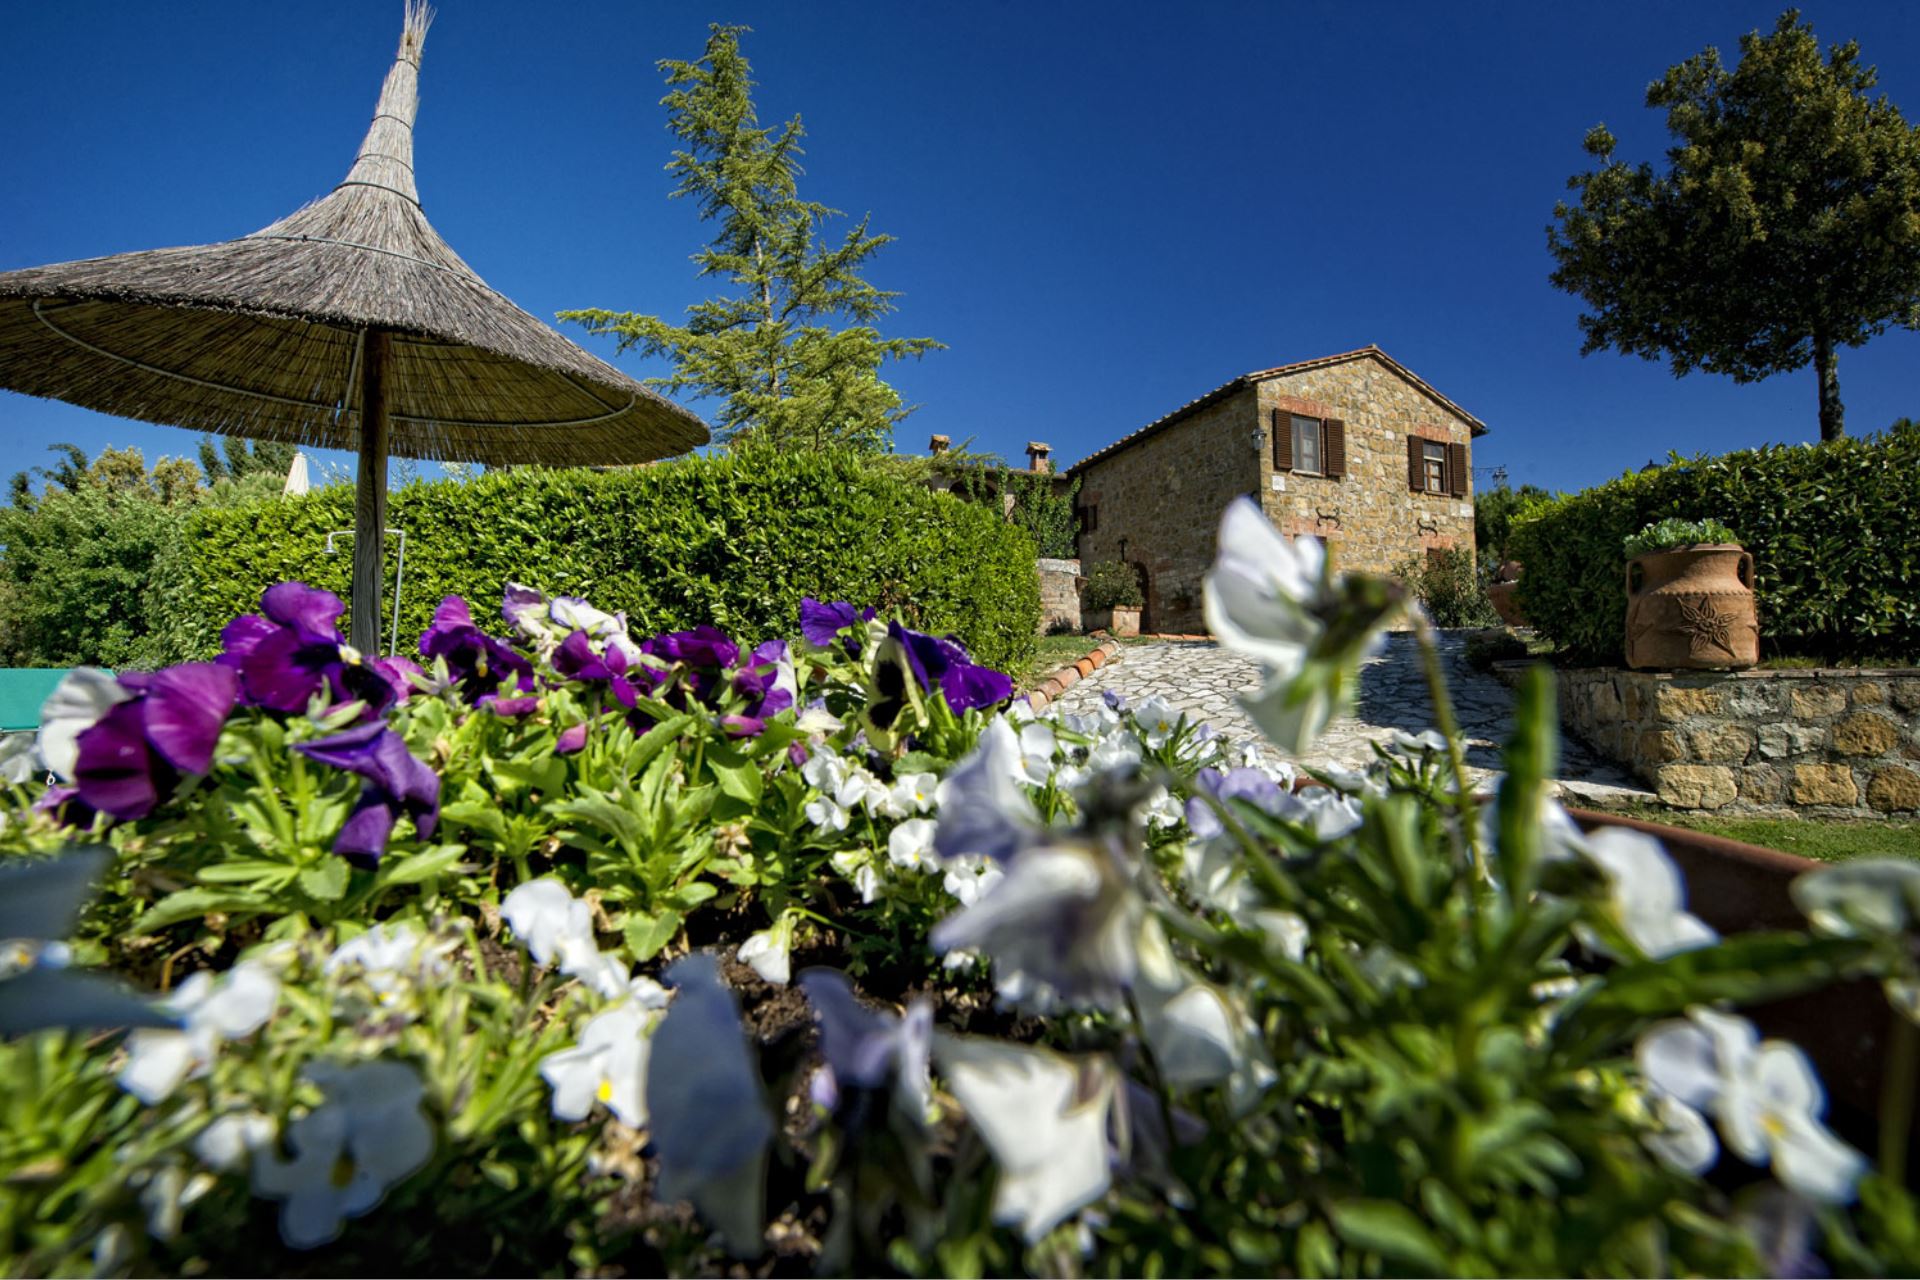 APARTMENTS WITH POOL IL CORTILE SAN QUIRICO D'ORCIA TOSCANA